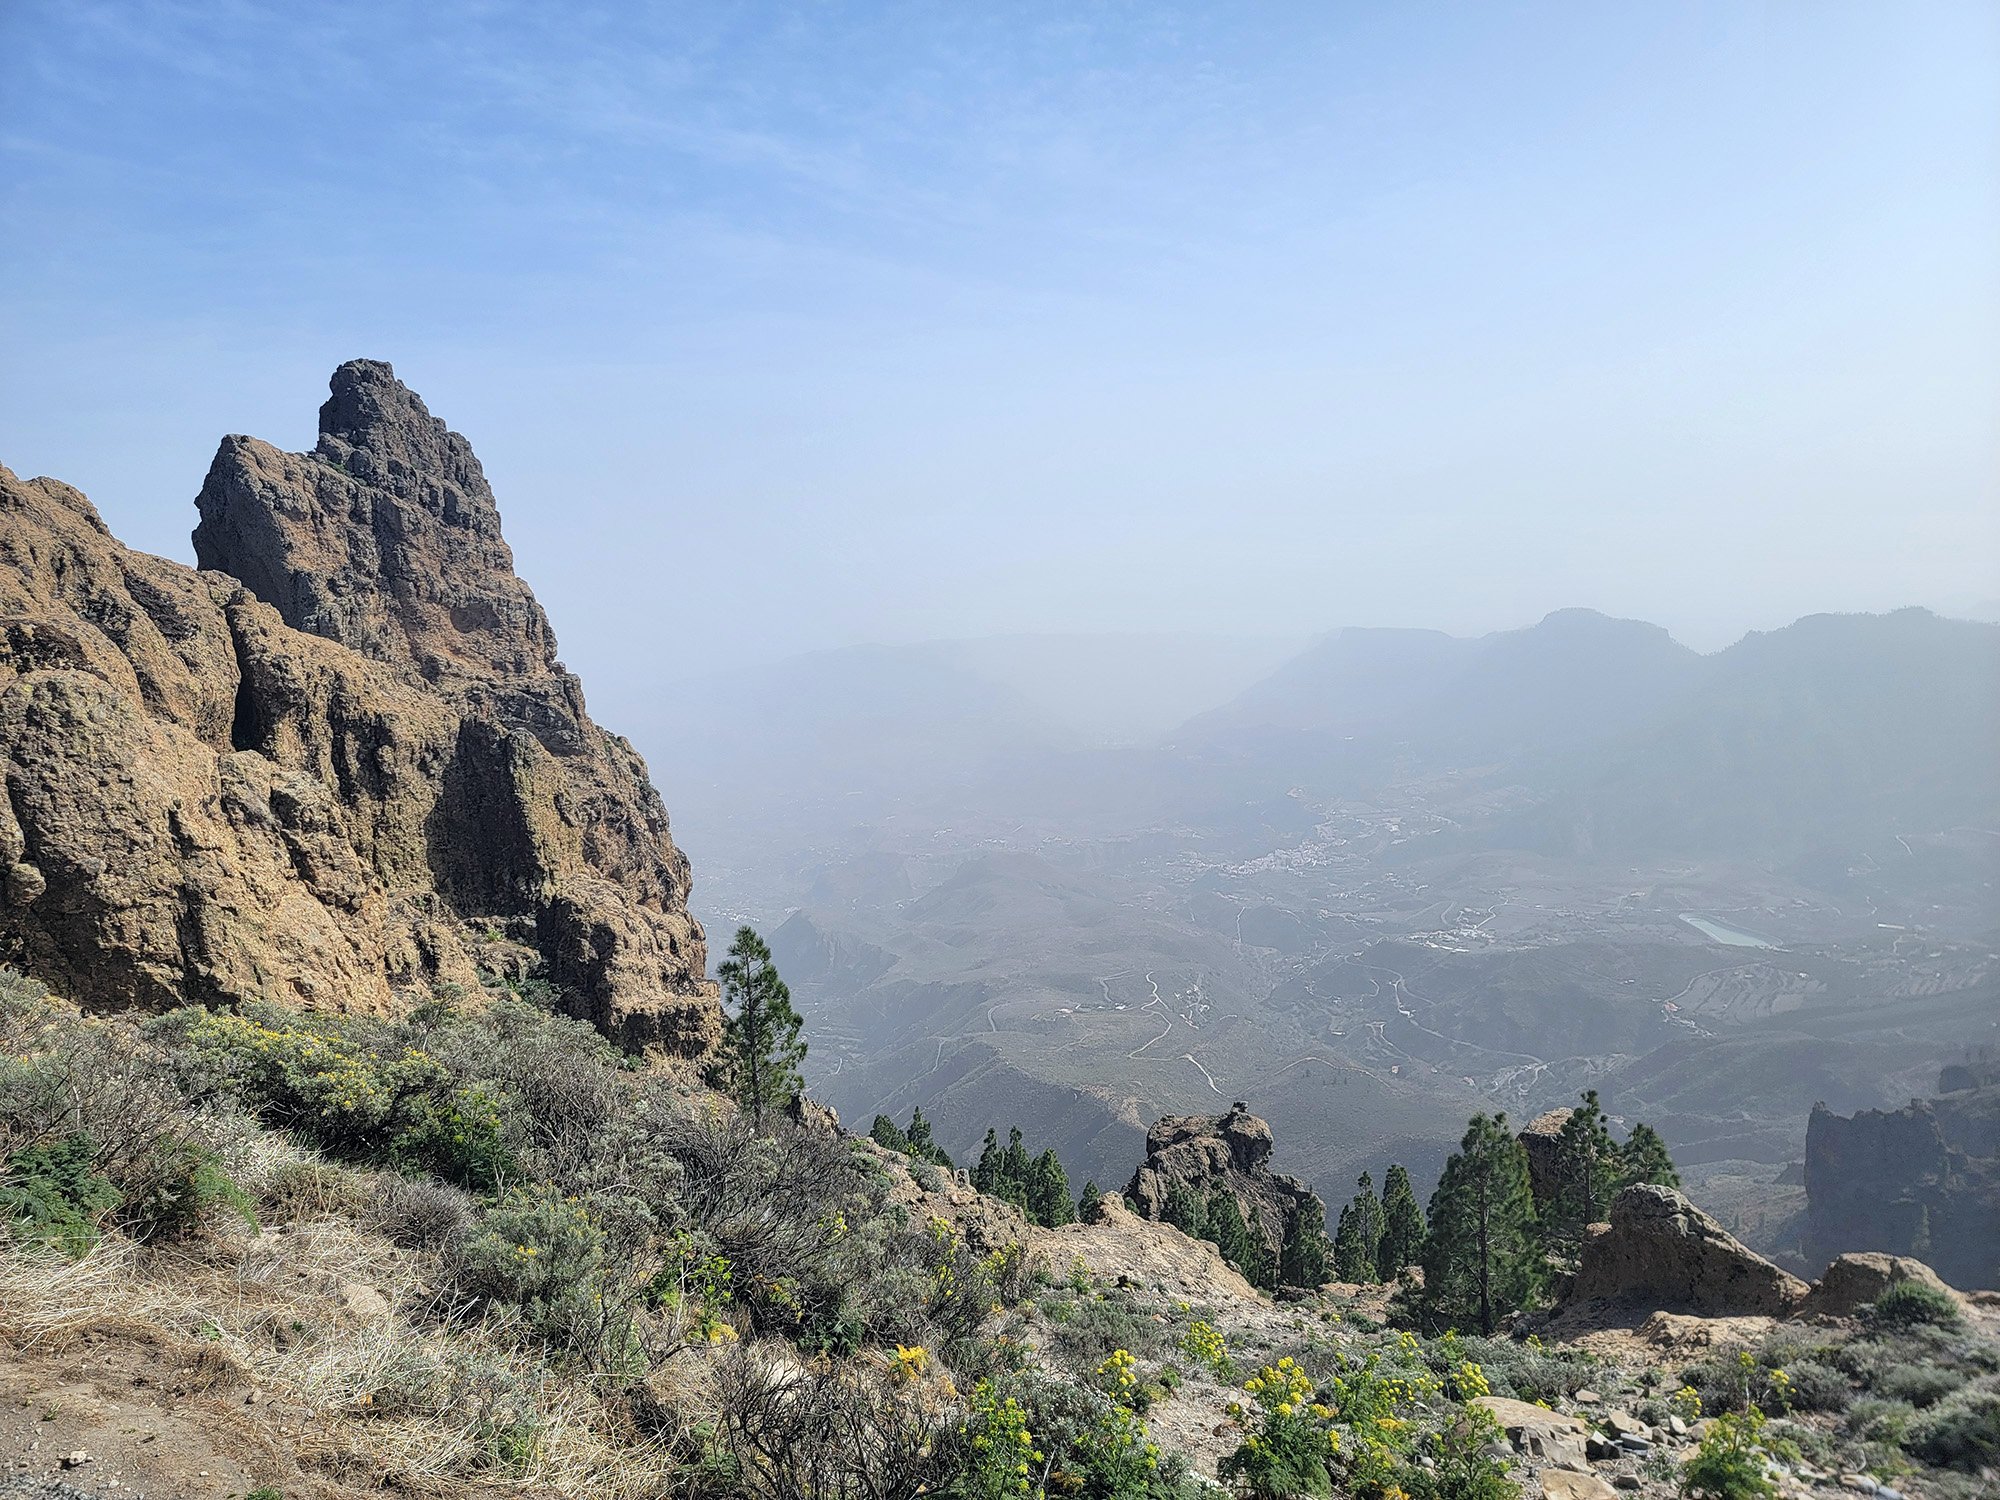 Made it to the Pico de Las Nieve! Check out the thick smog further down around Gran Canaria. Gross.